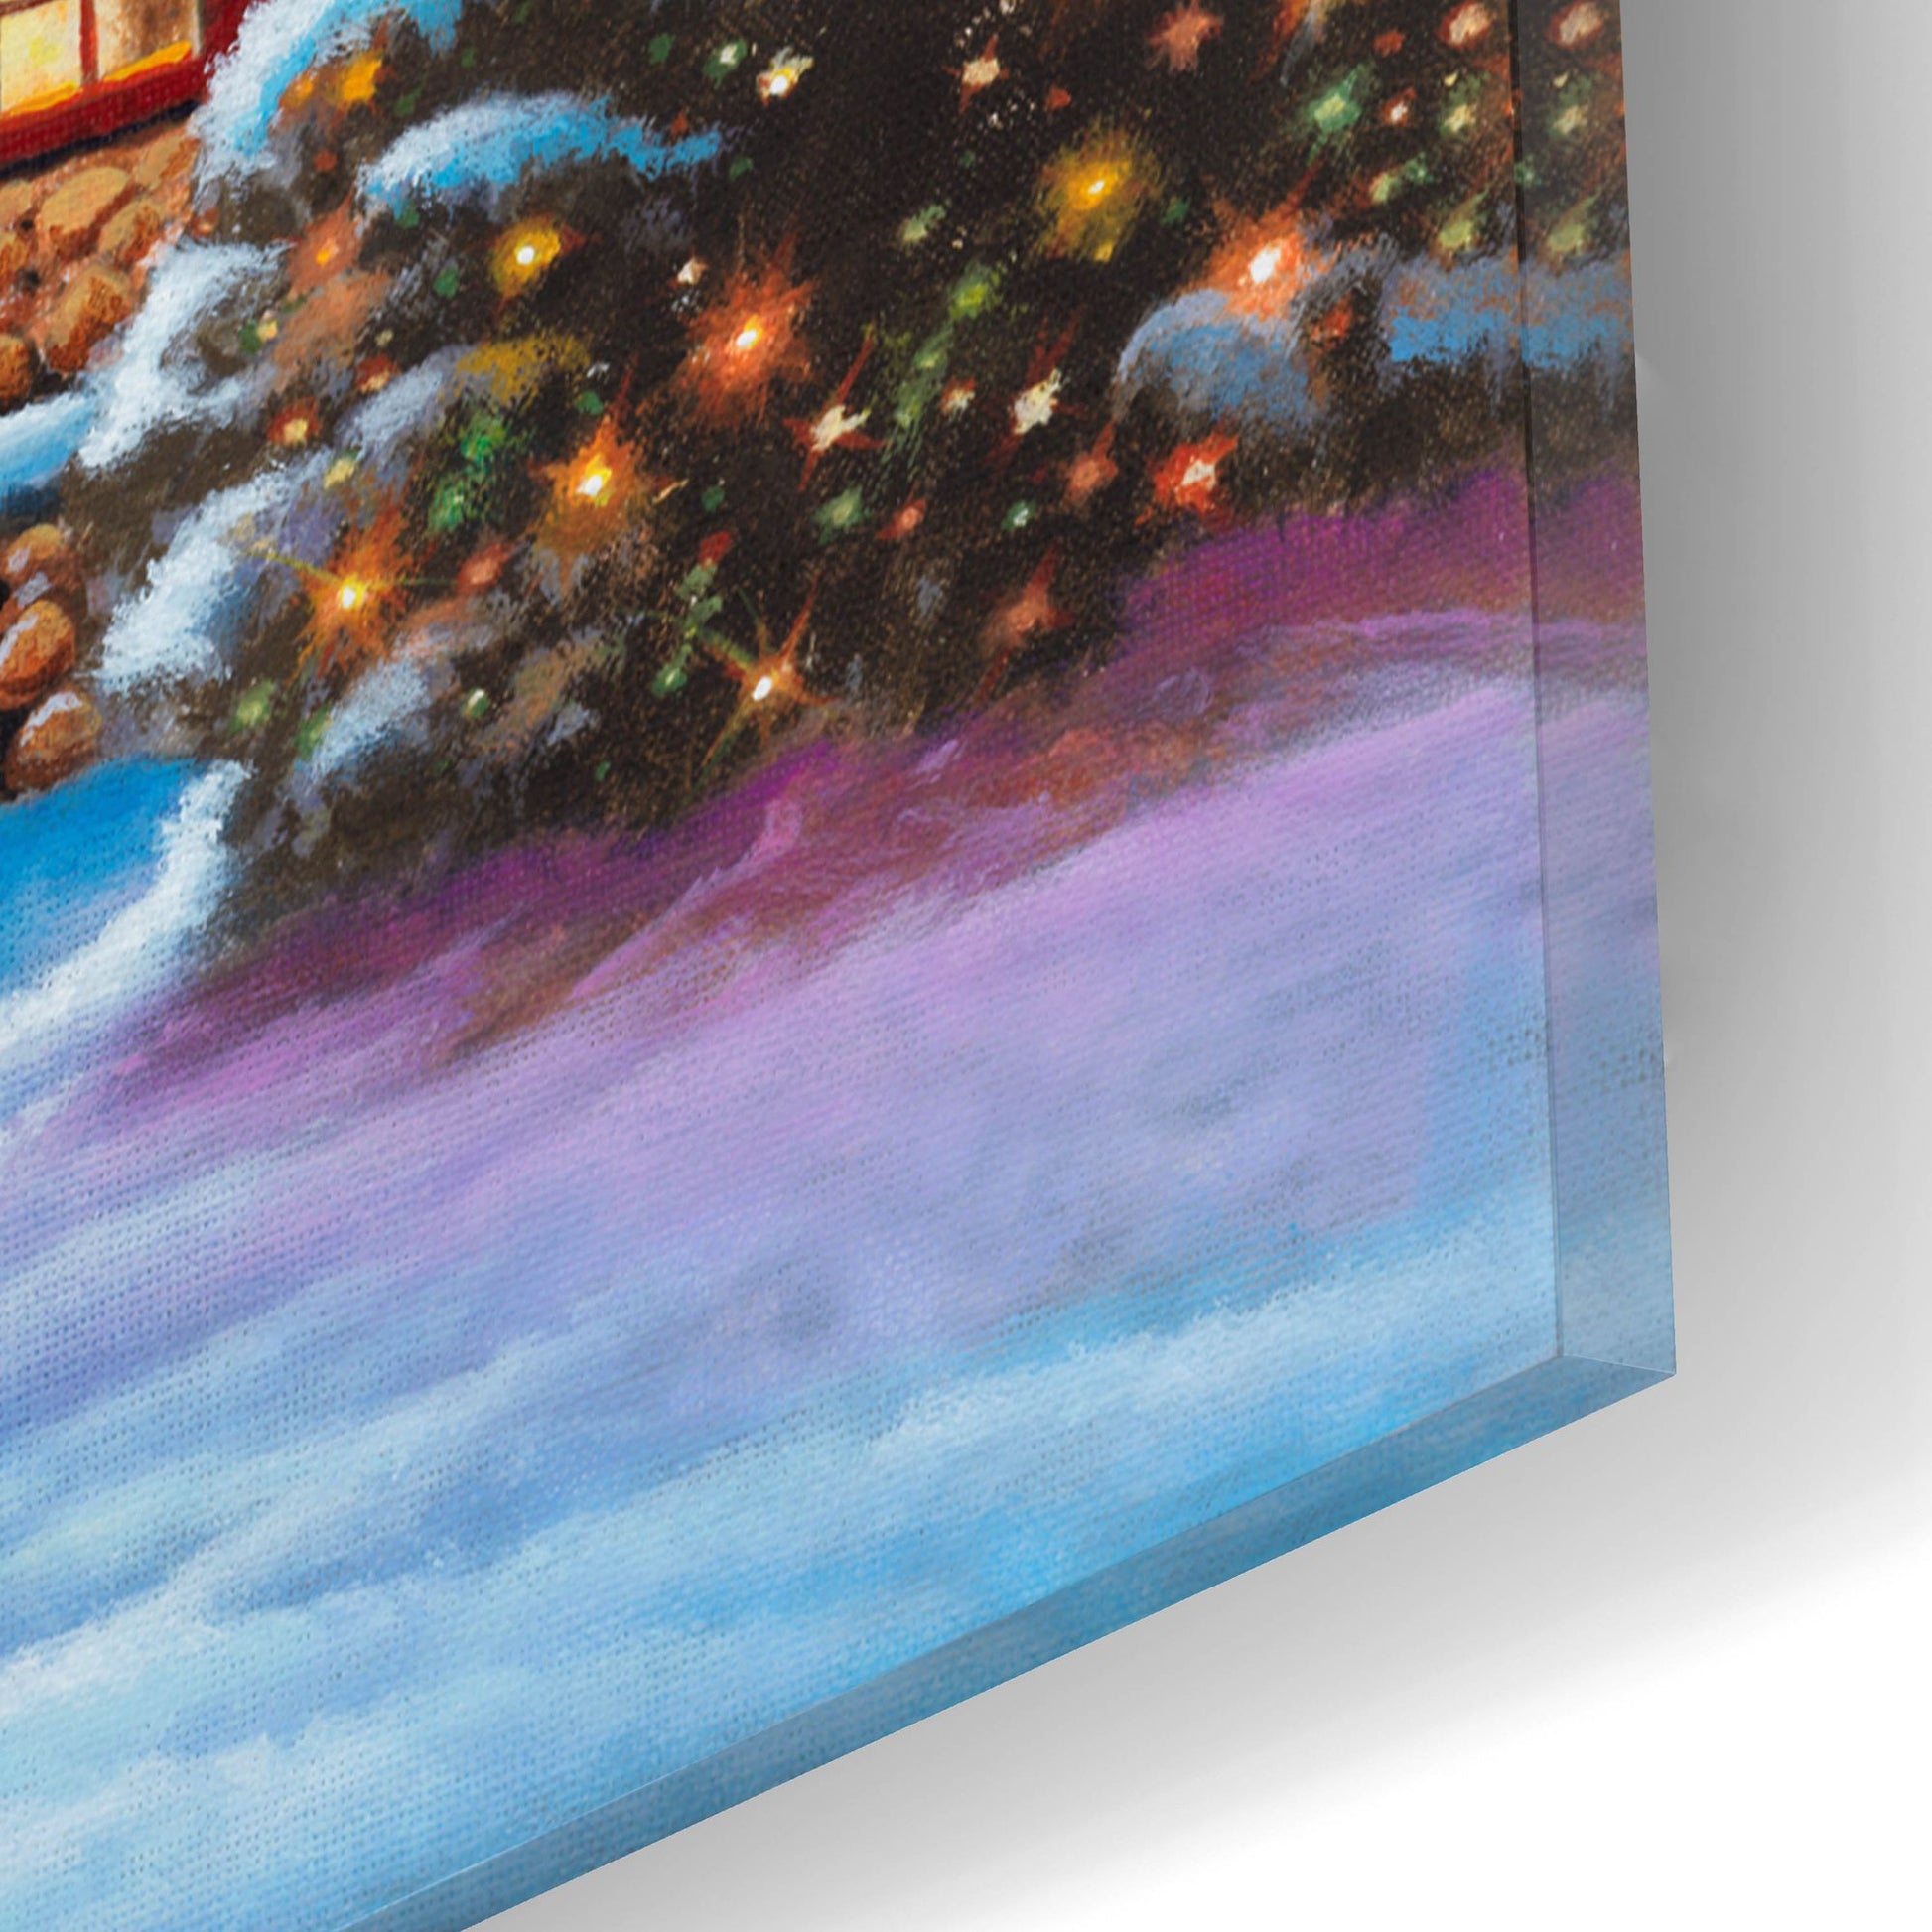 Epic Art 'Sunset In Christmas Village' by Geno Peoples, Acrylic Glass Wall Art,16x12